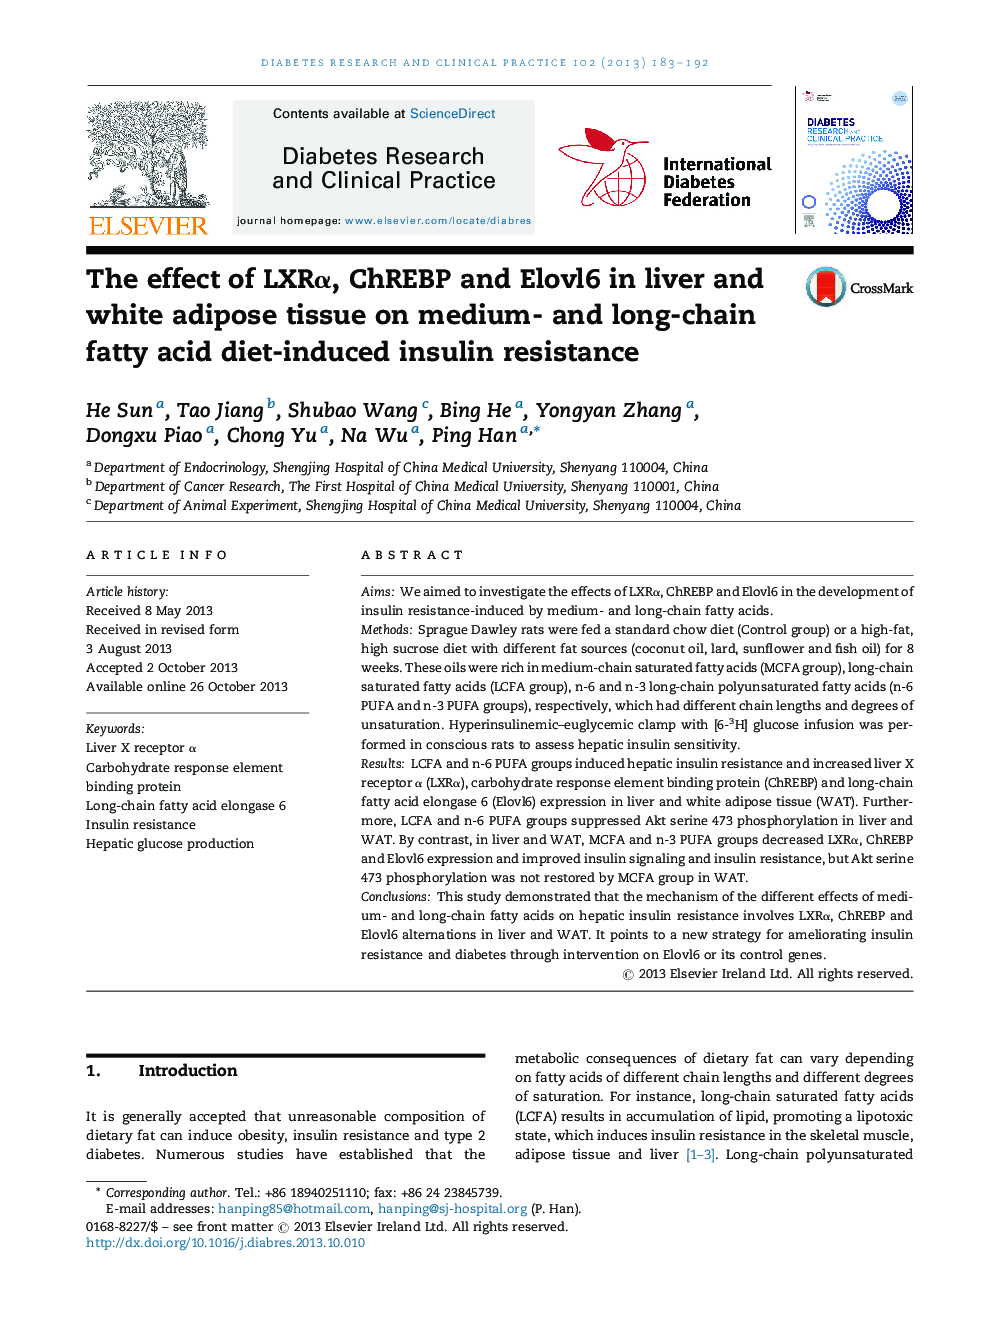 The effect of LXRα, ChREBP and Elovl6 in liver and white adipose tissue on medium- and long-chain fatty acid diet-induced insulin resistance